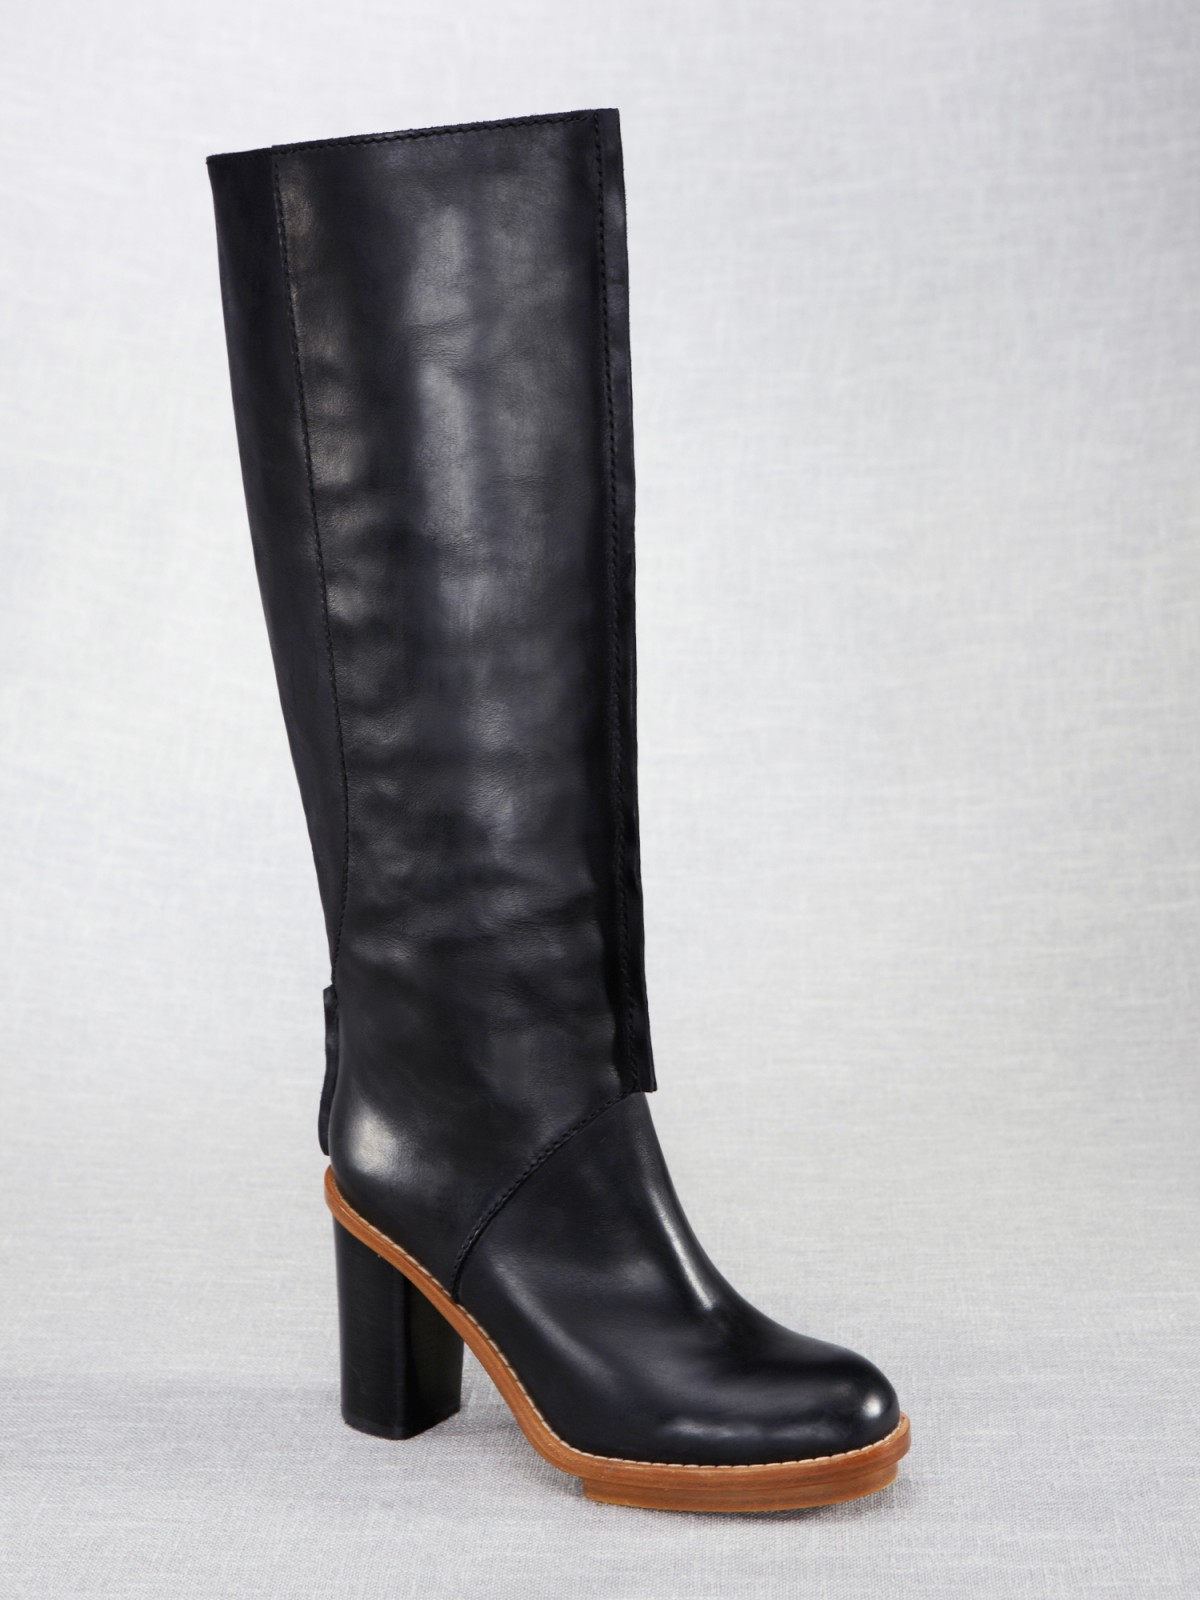 STYLISTA: These boots made for...